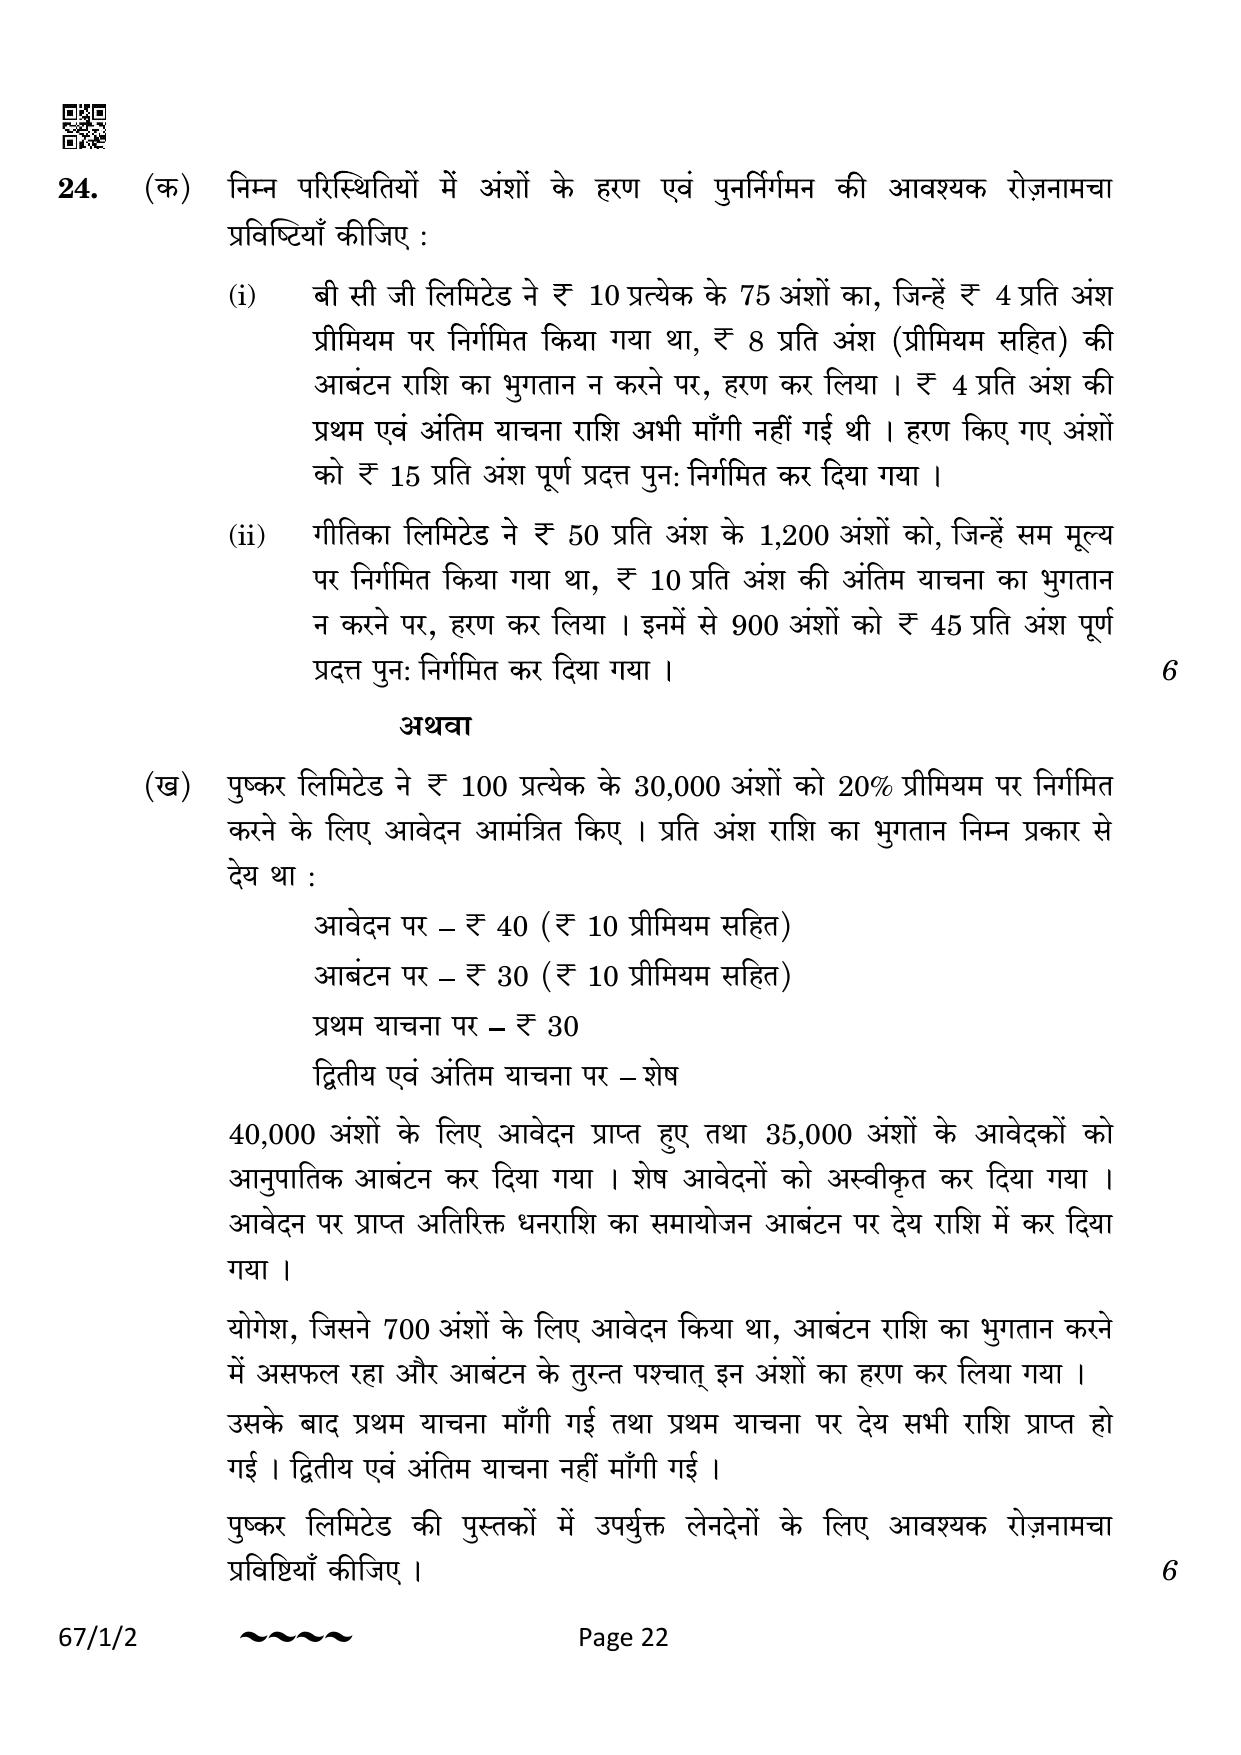 CBSE Class 12 67-1-2 Accountancy 2023 Question Paper - Page 22